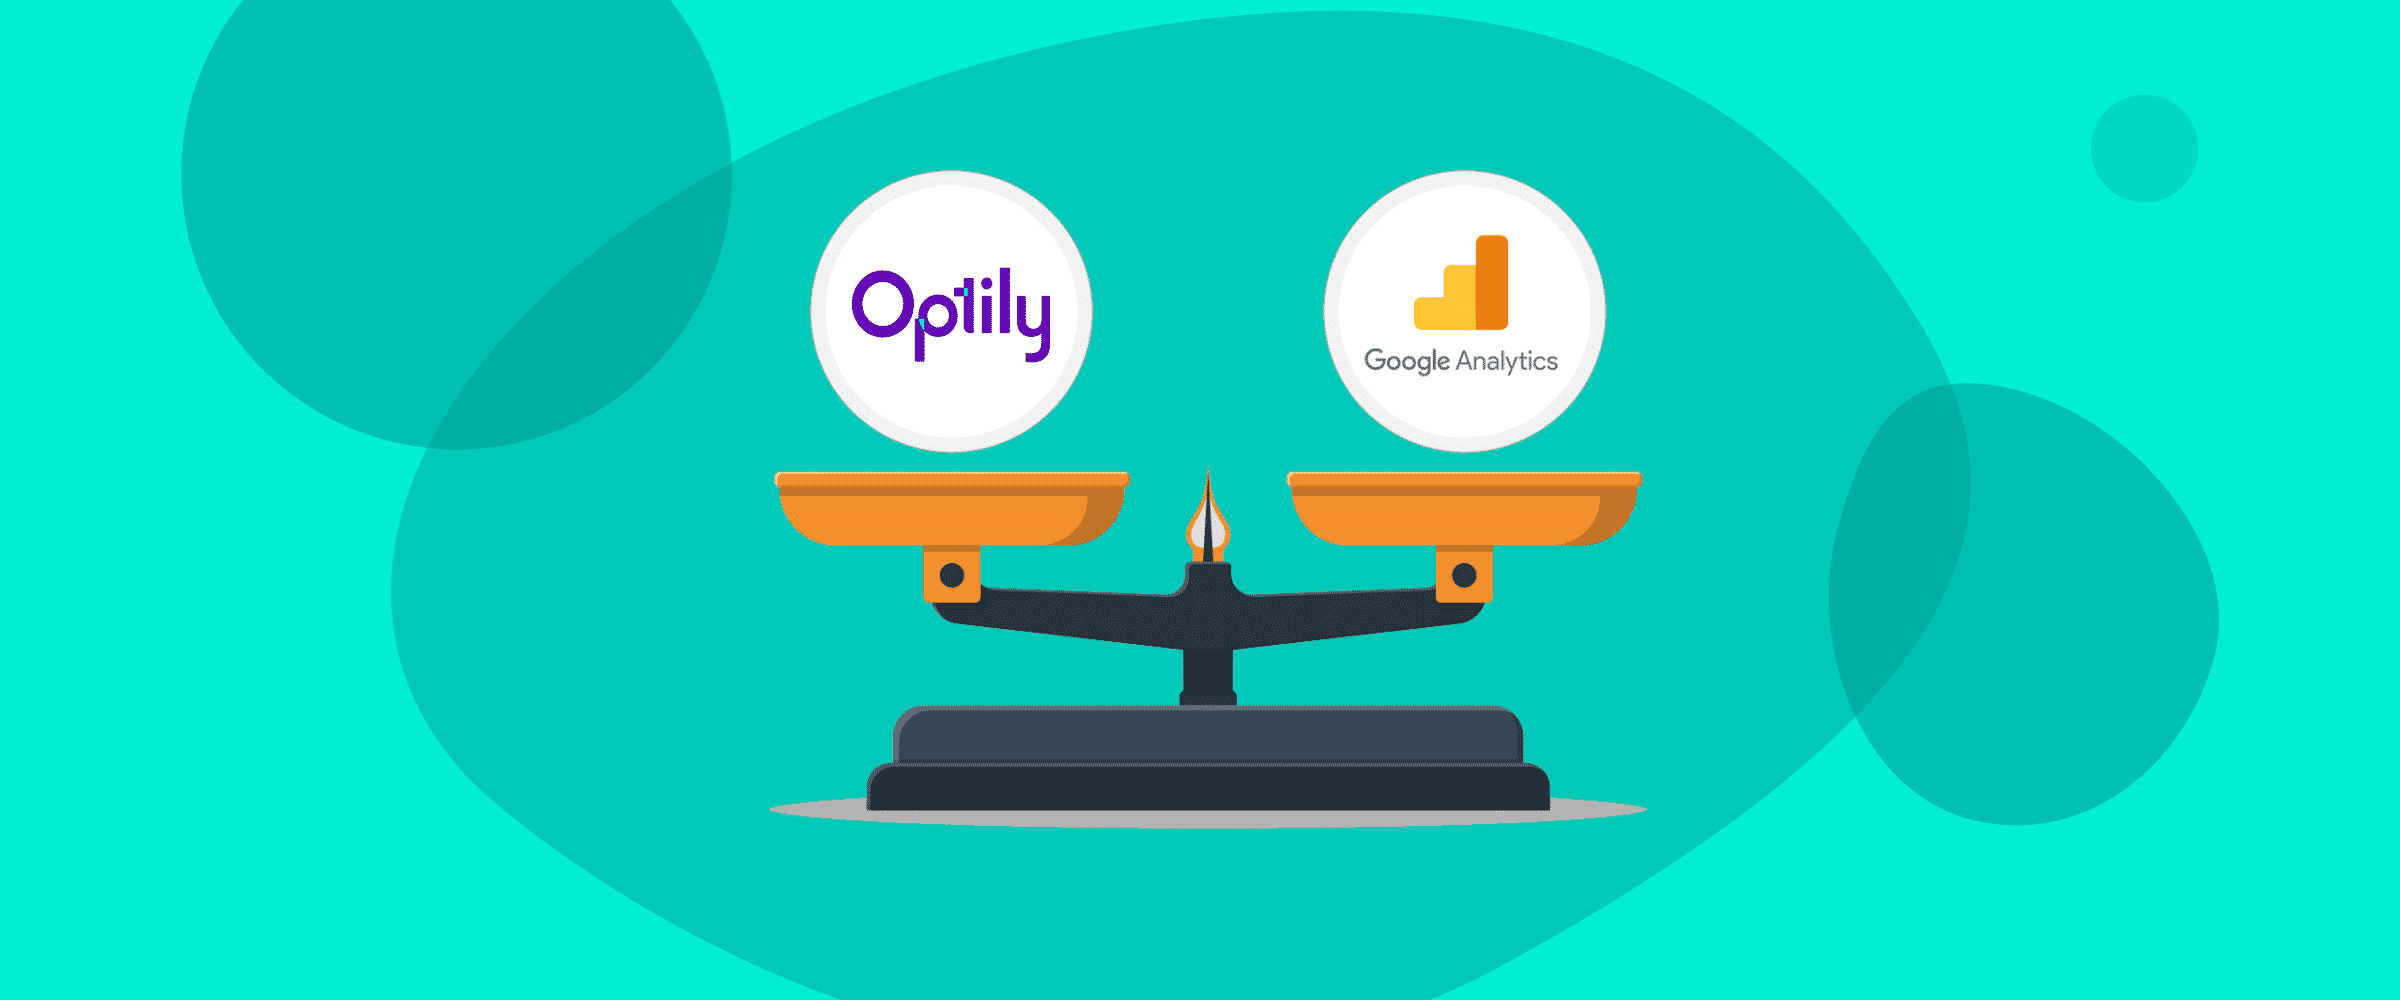 Optily vs Google Analytics Is there a difference